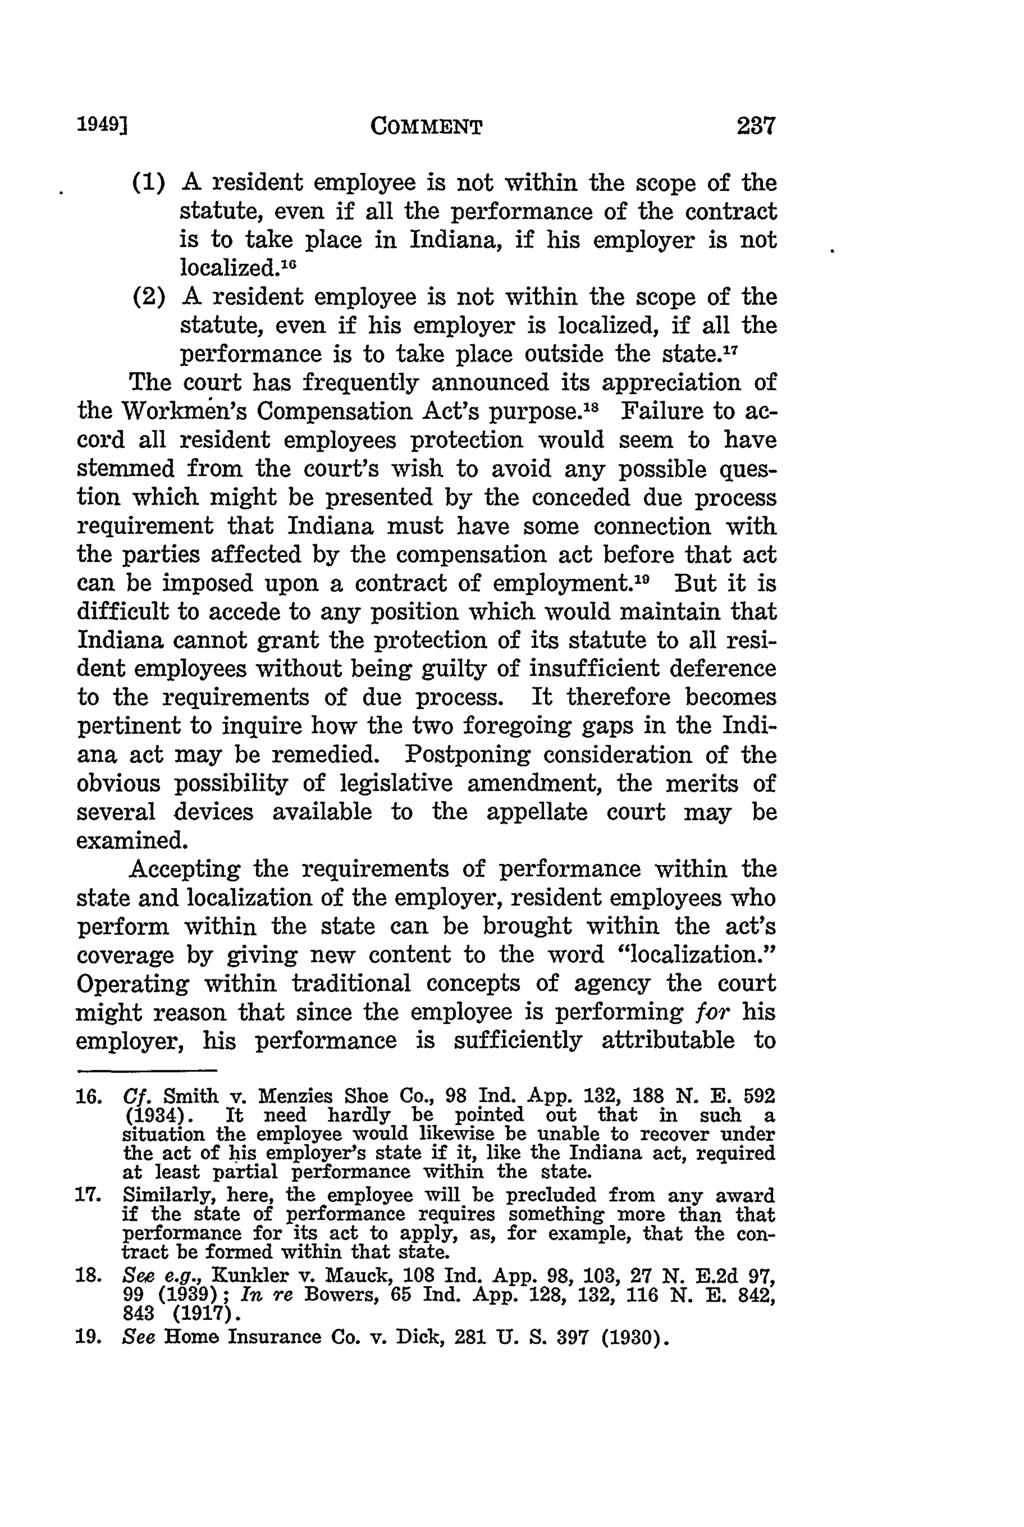 1949] COMMENT (1) A resident employee is not within the scope of the statute, even if all the performance of the contract is to take place in Indiana, if his employer is not localized.